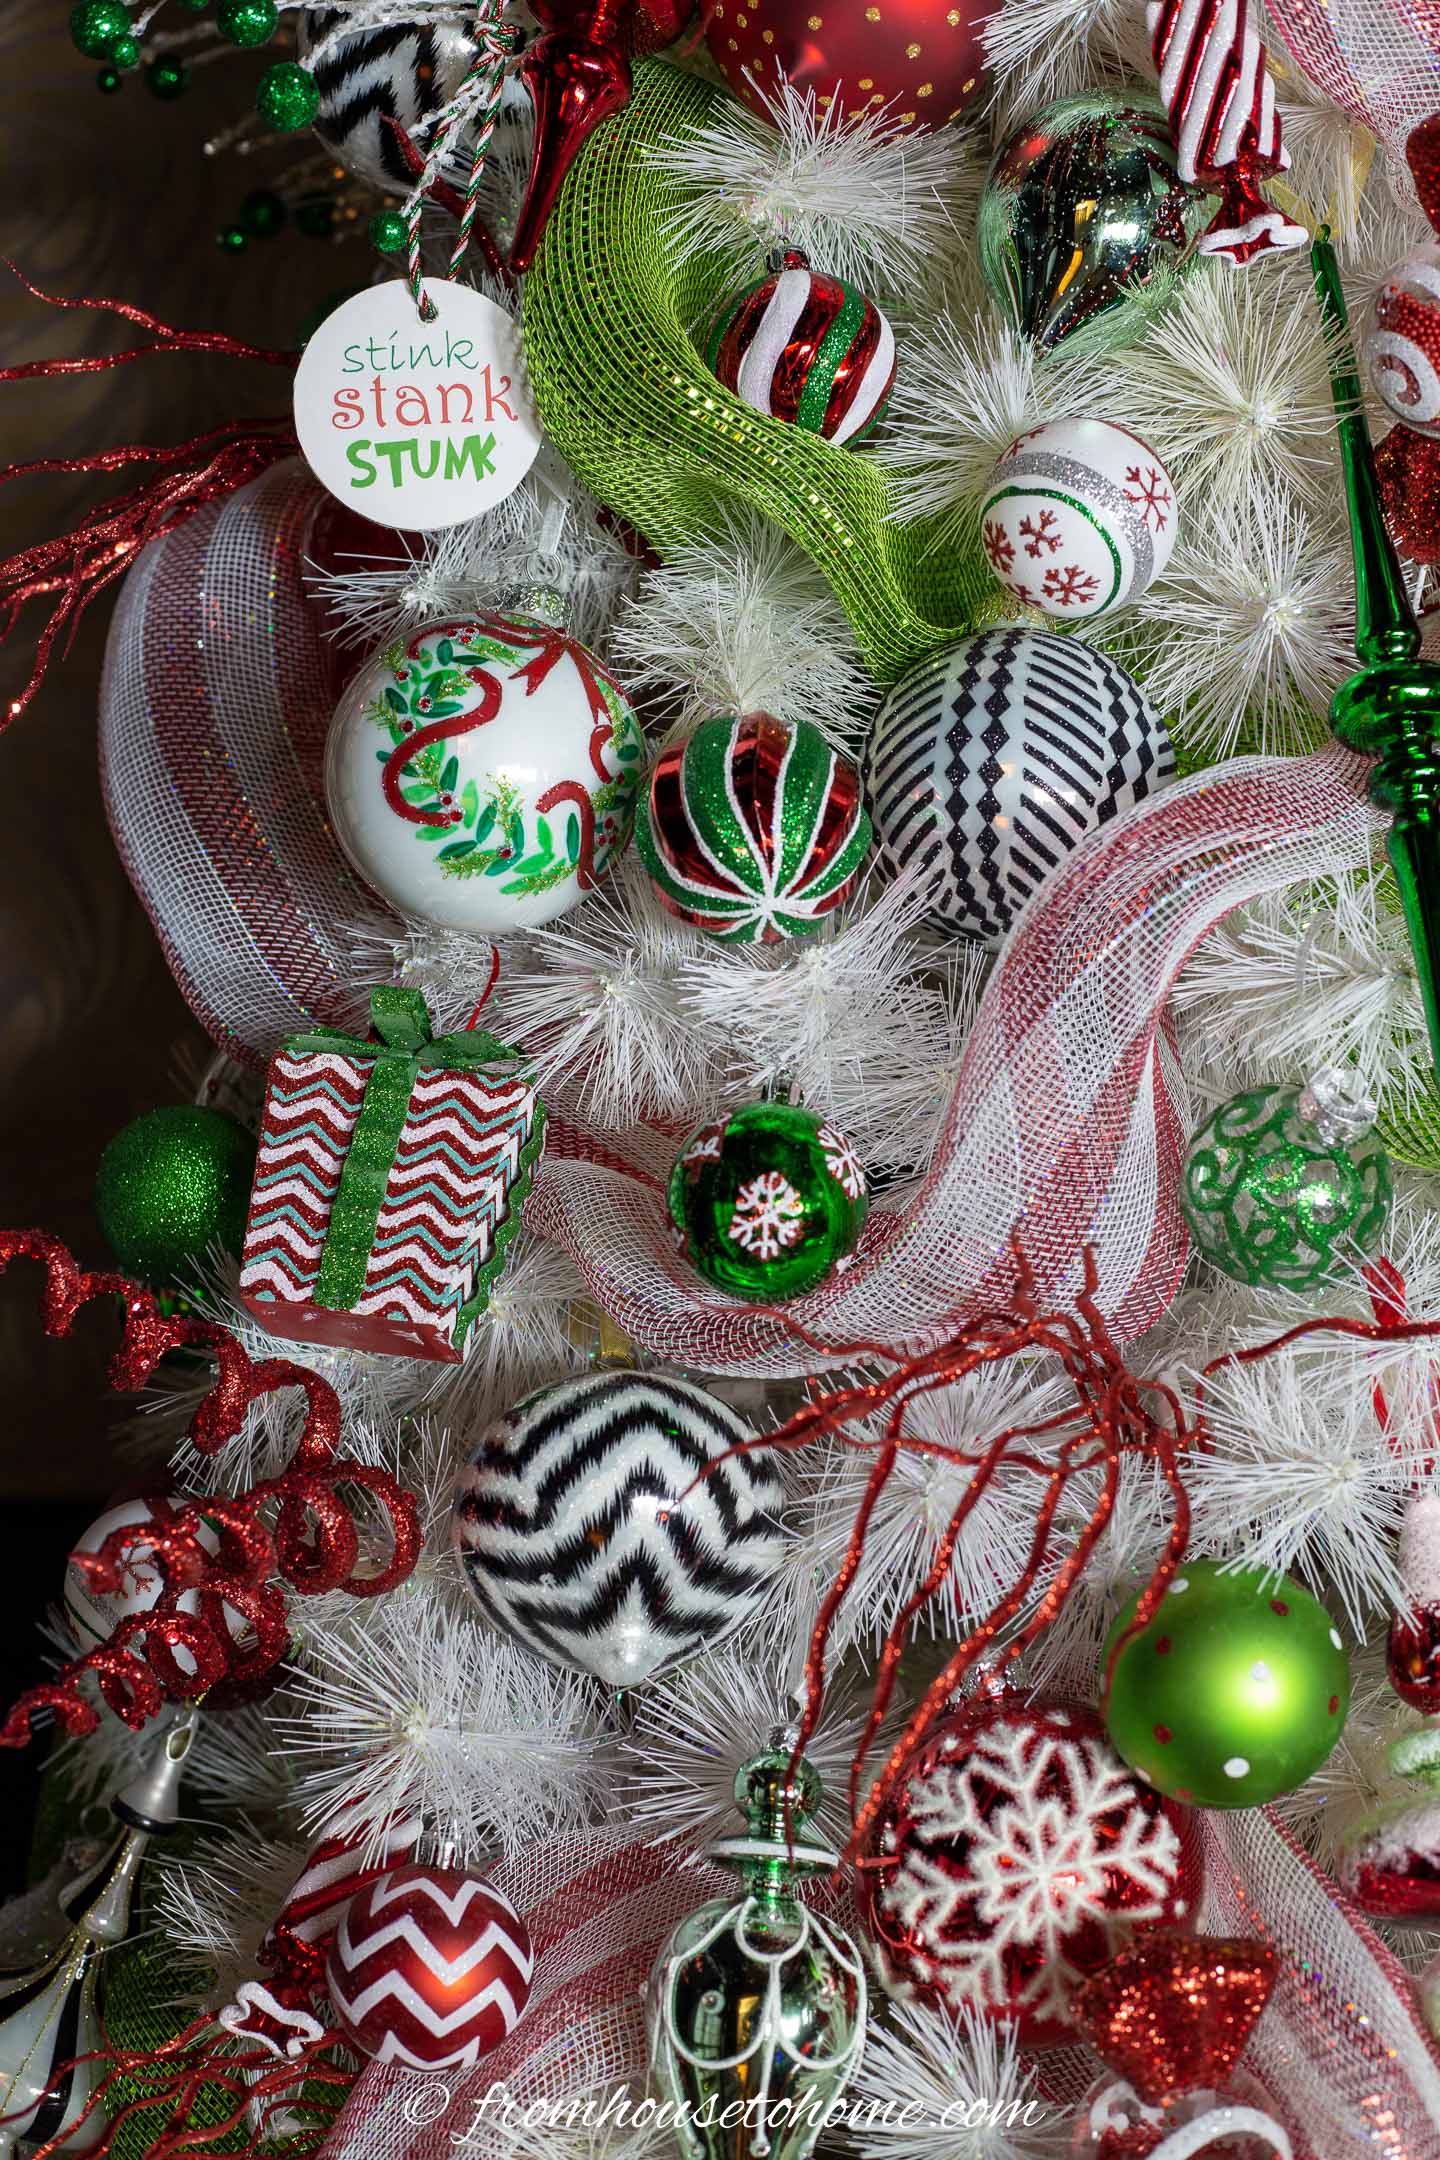 Close up of the ornaments on the Grinch Christmas tree